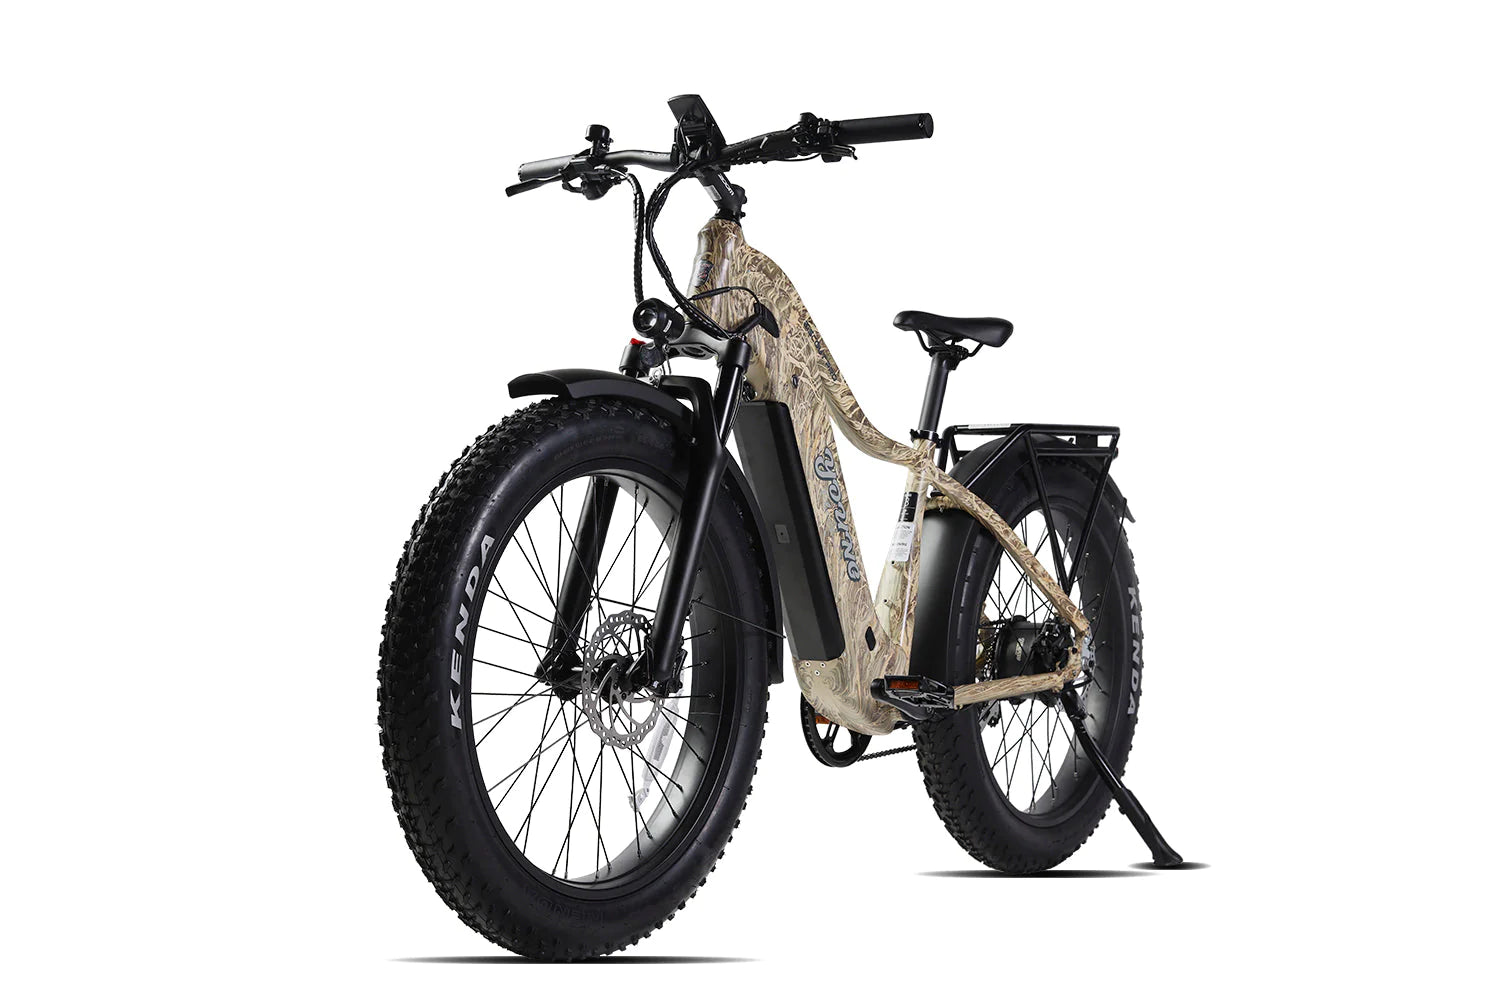 Young Electric E-Scout Pro | 750W Long Range Hunting eBike | 960Wh LG Battery | Up to 80 Miles, 28 MPH | 26’’ All-terrain eBike